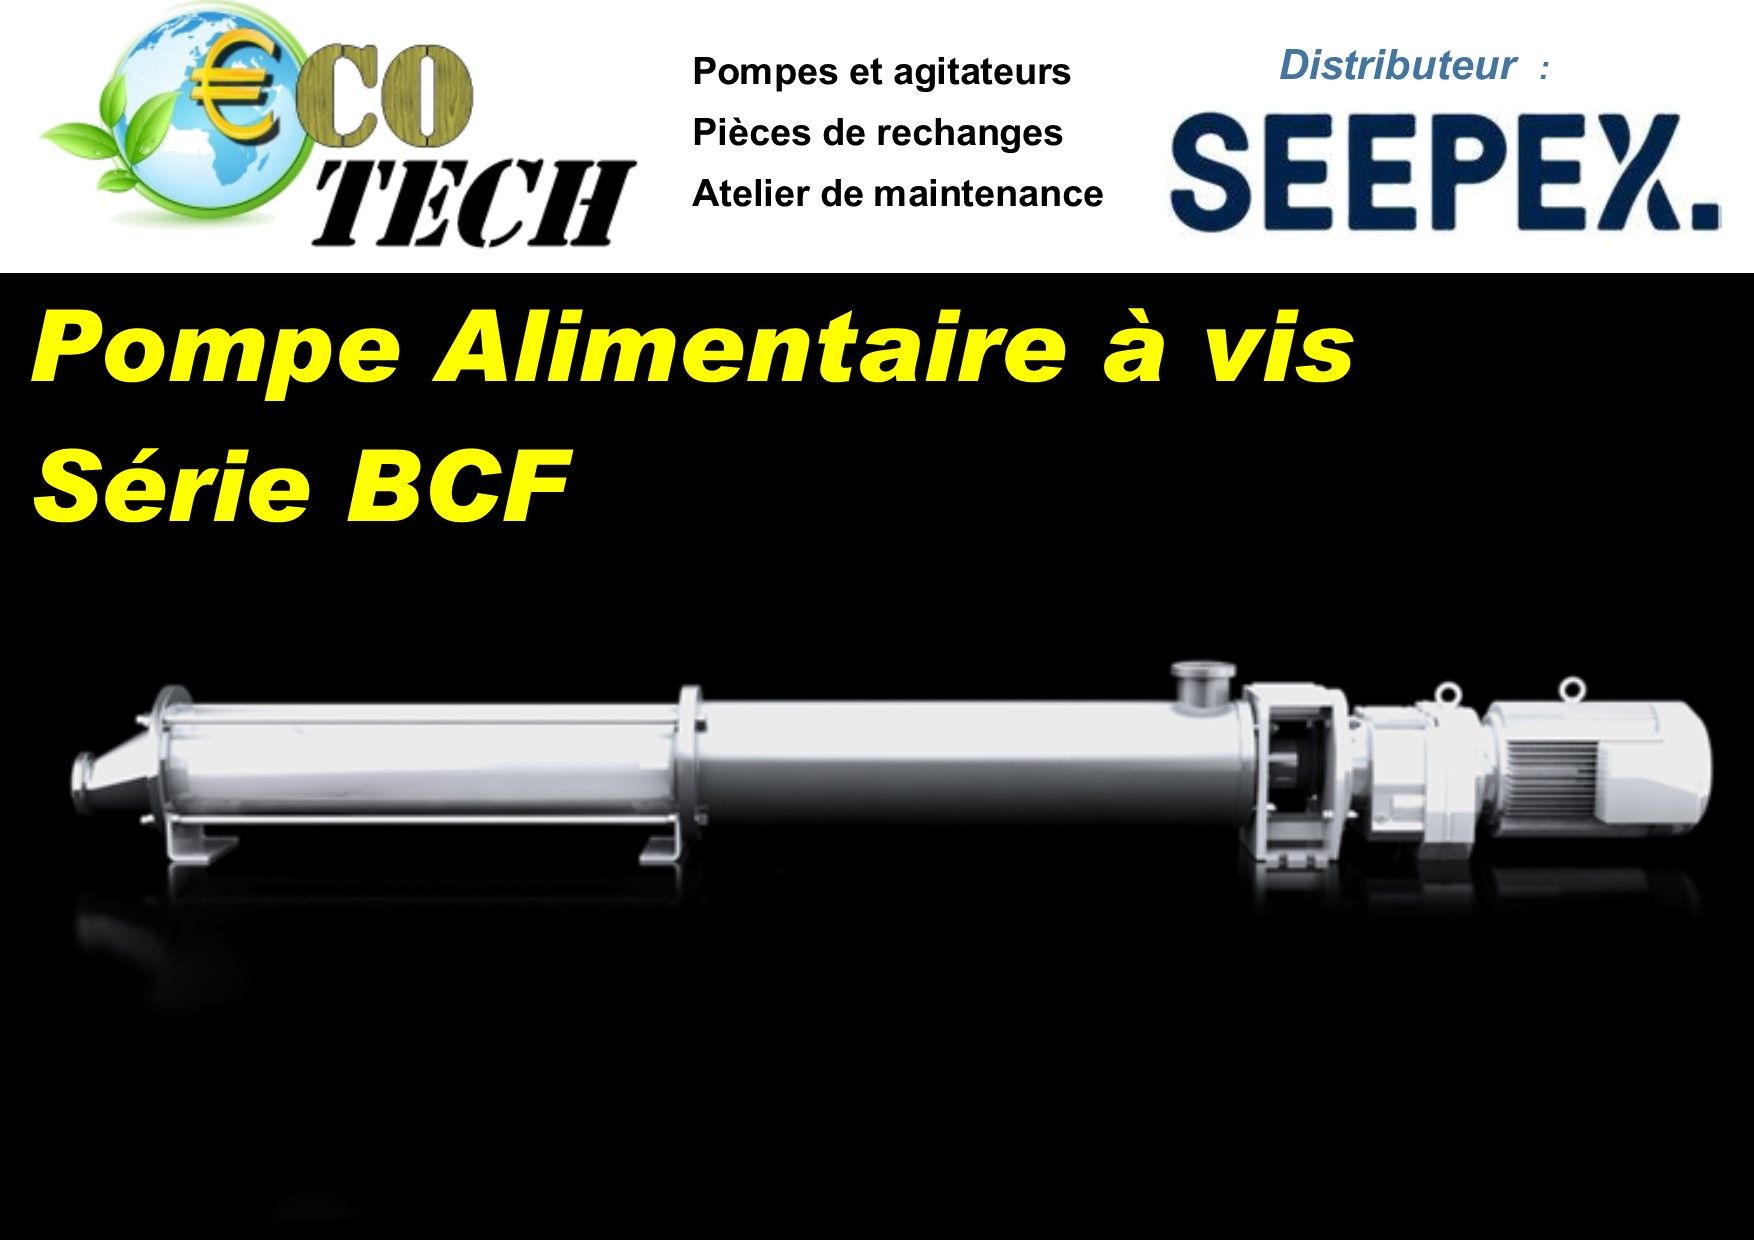 Pompe a vis seepex série bcf alimentaire normes sanitaires 3-a sanitary ehedg_0